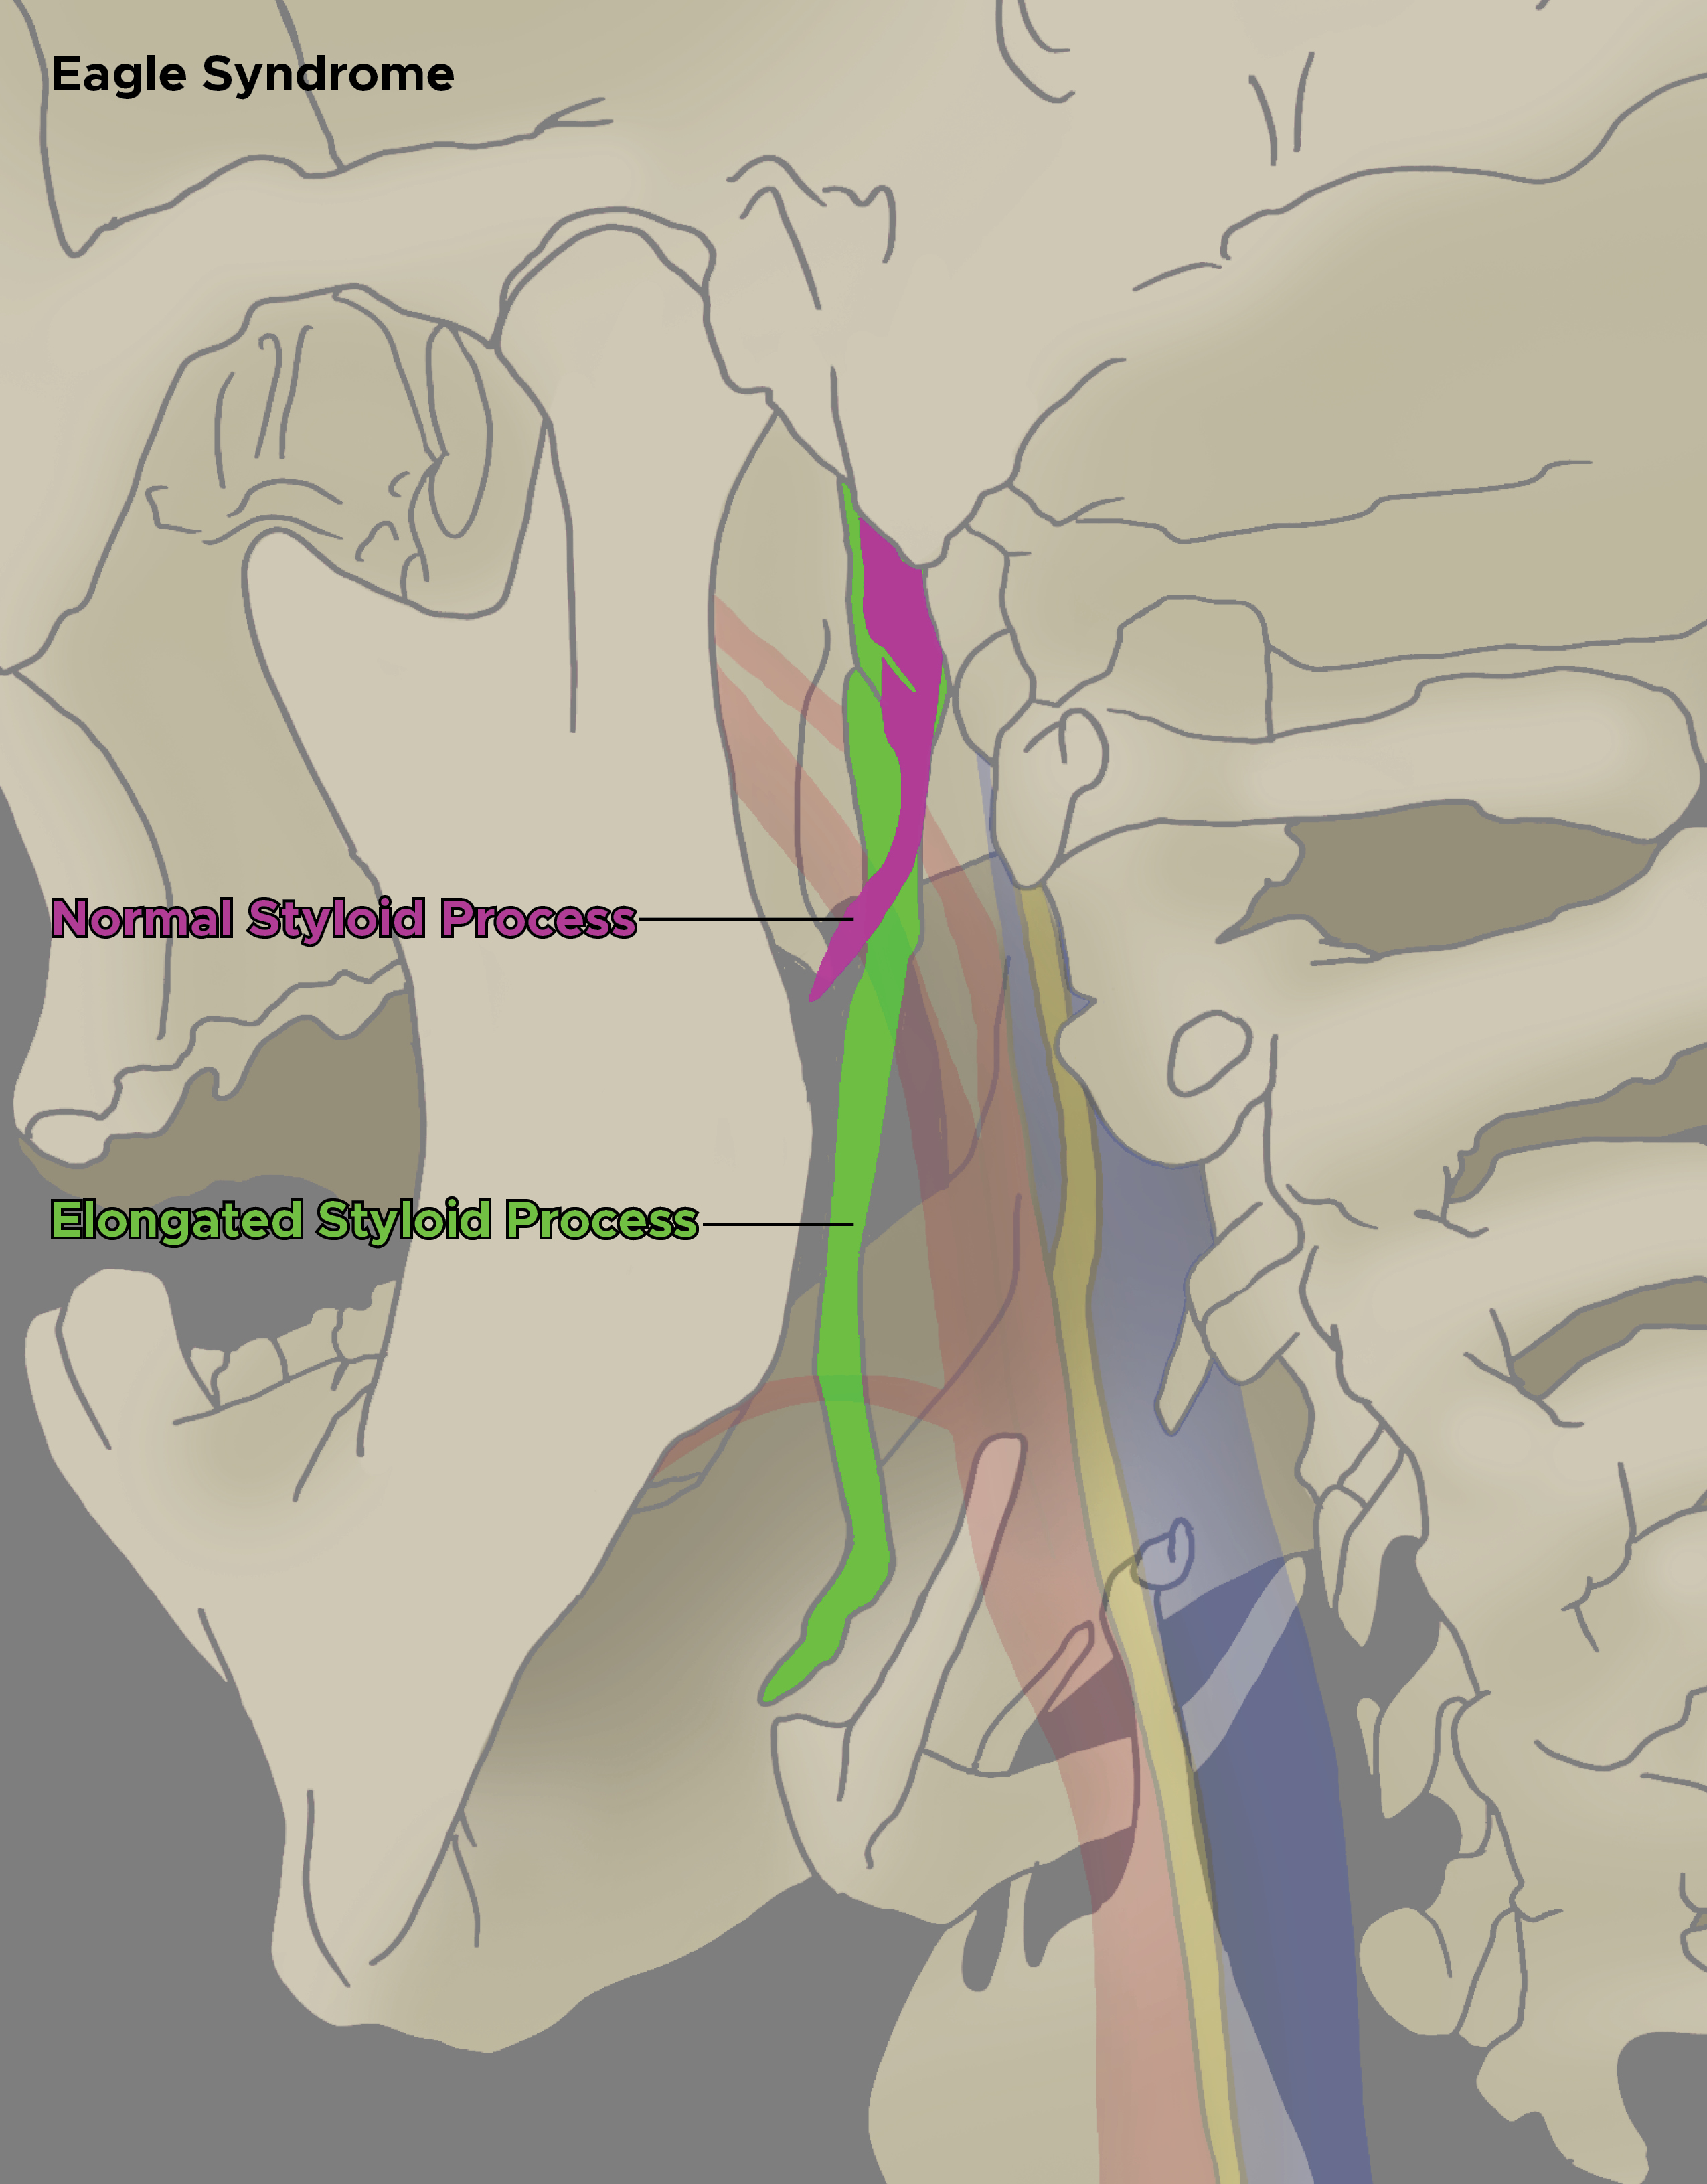 Illustration of elongated styloid process, Eagle Syndrome